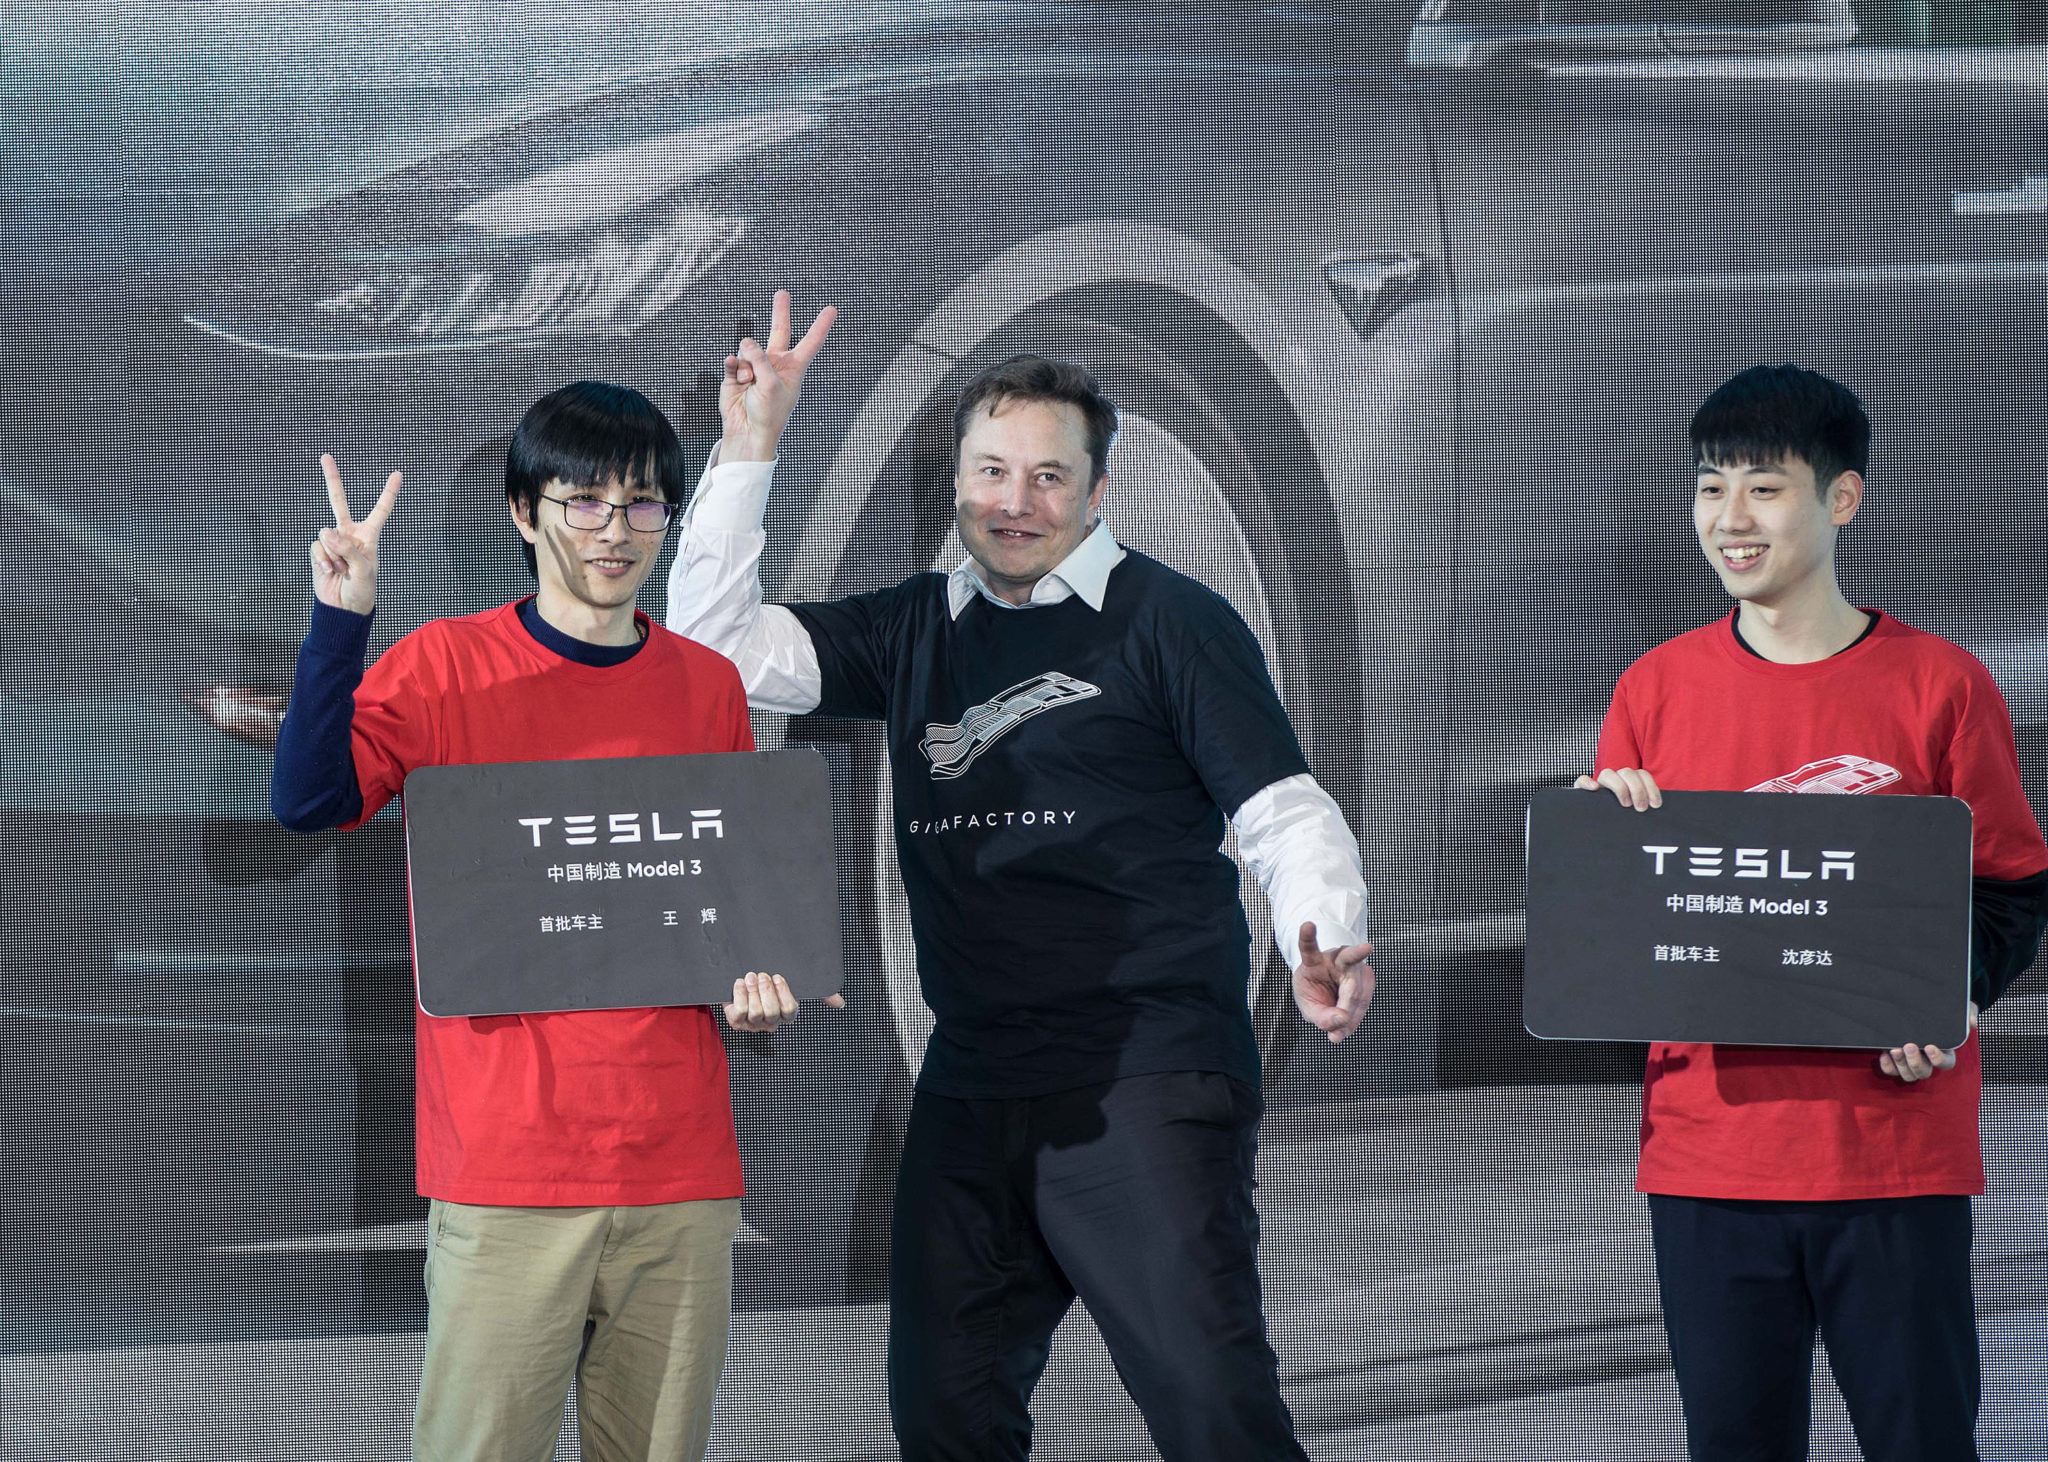 Business is booming for 85-billion-dollar Tesla